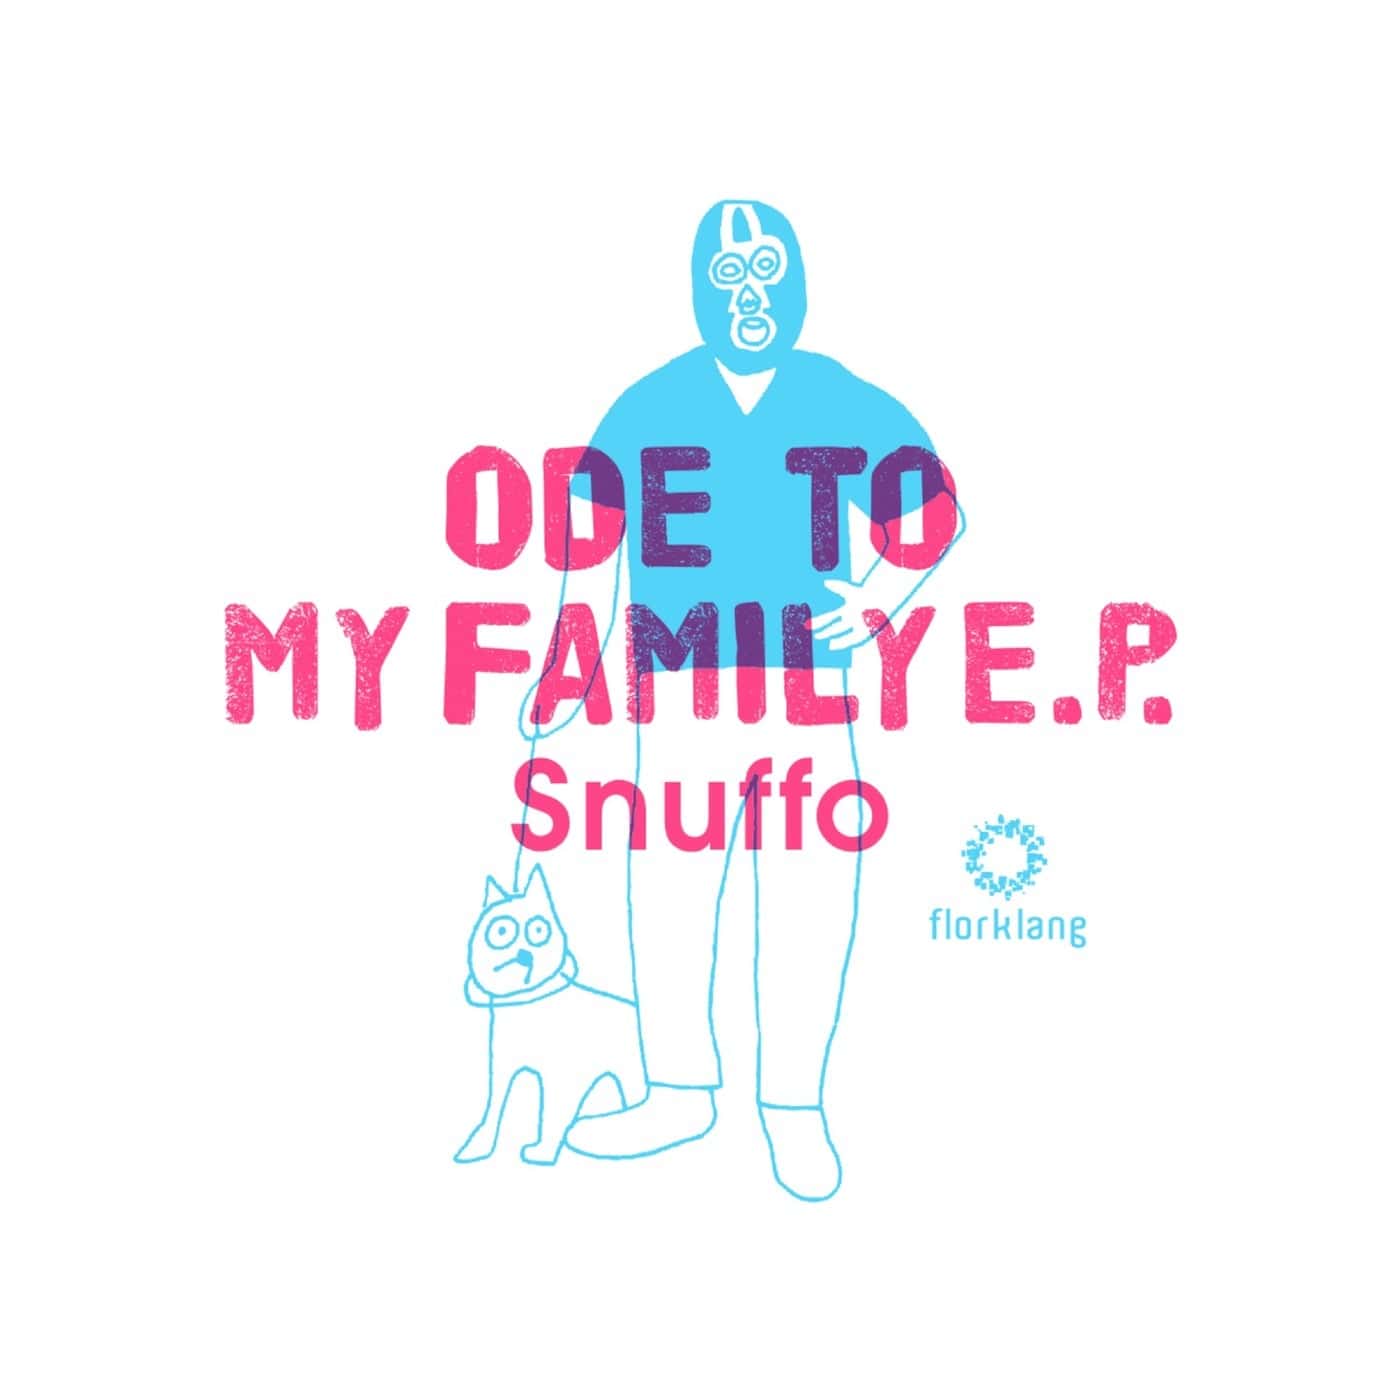 Download Snuffo - Ode to My Family on Electrobuzz